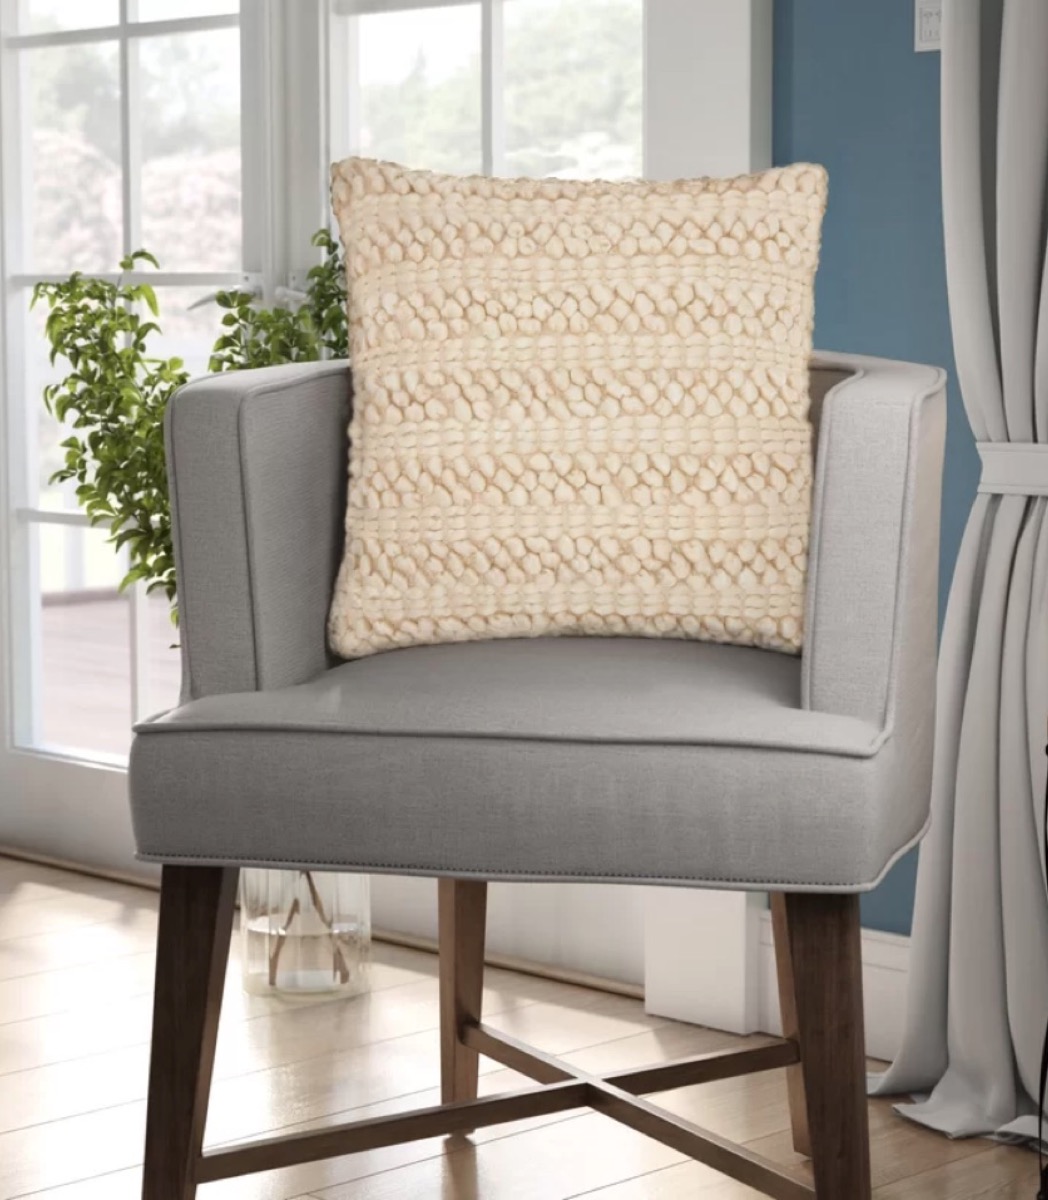 gray chair with striped tan pillow on it